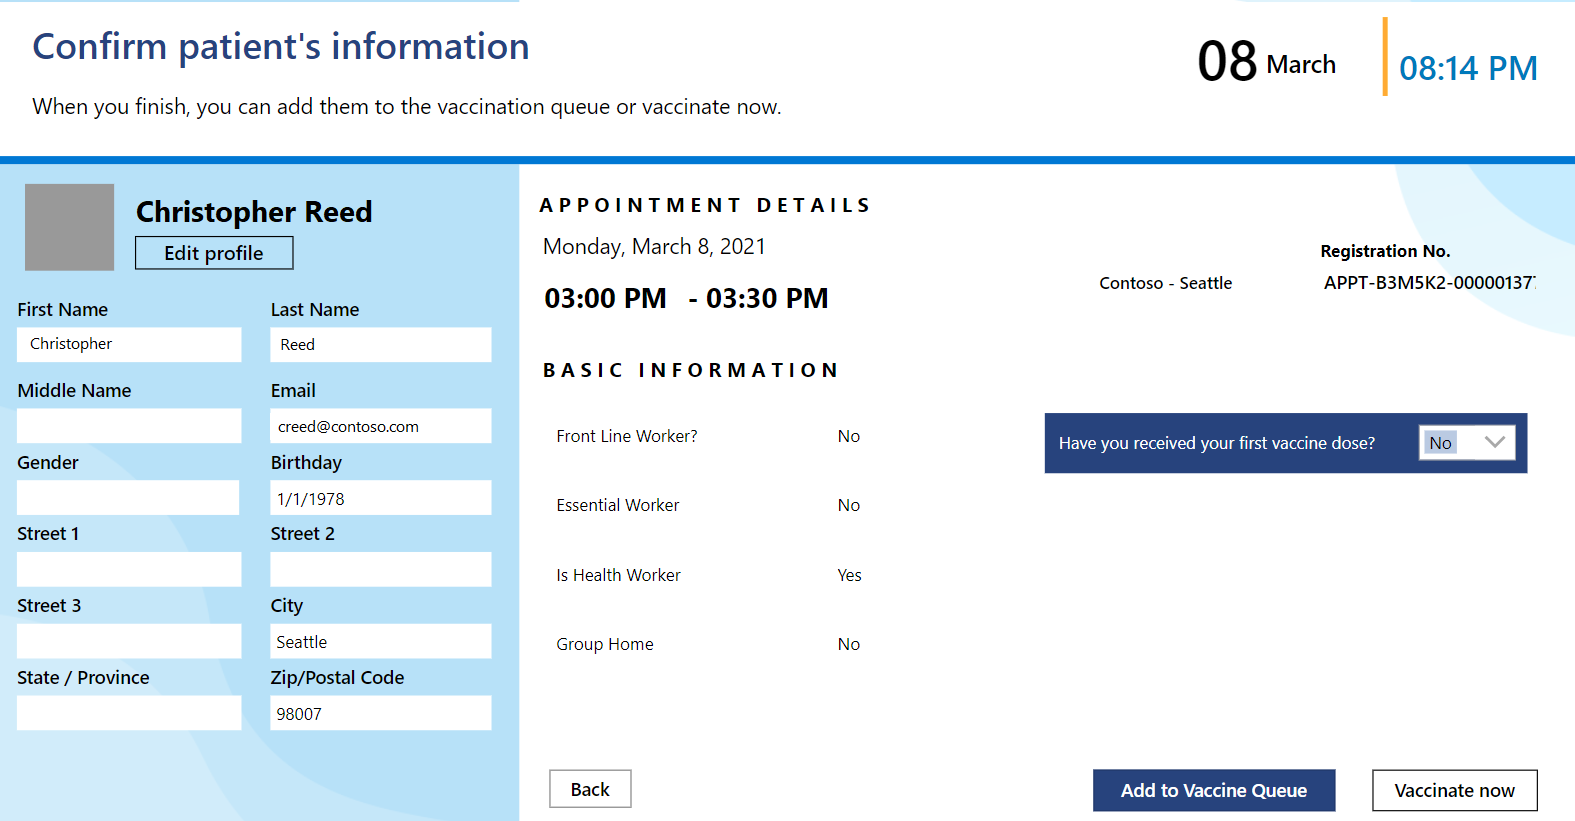 Screenshot of Christopher Reed's appointment details with the Add to Vaccine Queue and Vaccinate now buttons.